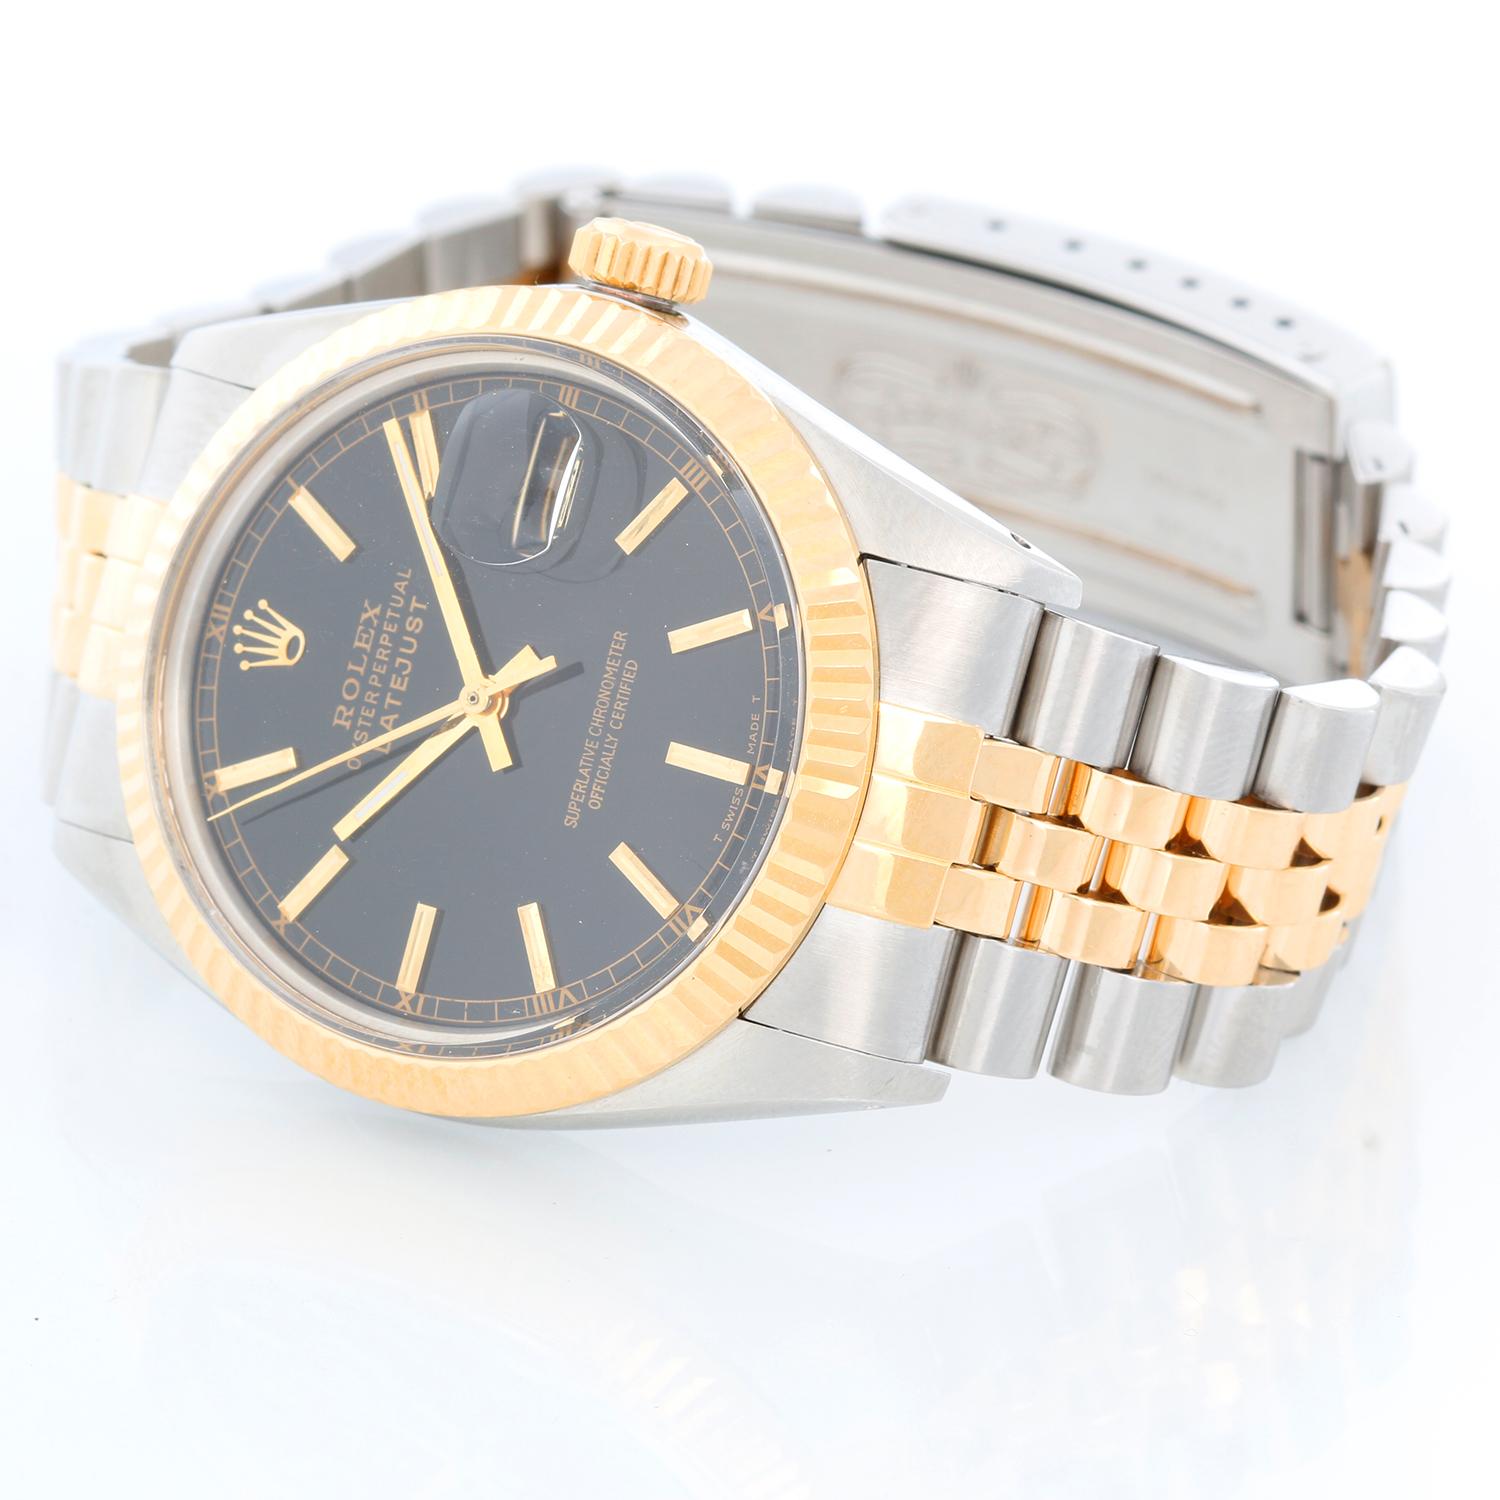 Men's Rolex Datejust 2-Tone Watch 16013 - Automatic winding, 27 jewels, Quickset, acrylic crystal. Stainless steel case with fluted bezel ( 36 mm ). White dial with stick hour markers. Rolex Jubilee . Pre-owned with custom box.